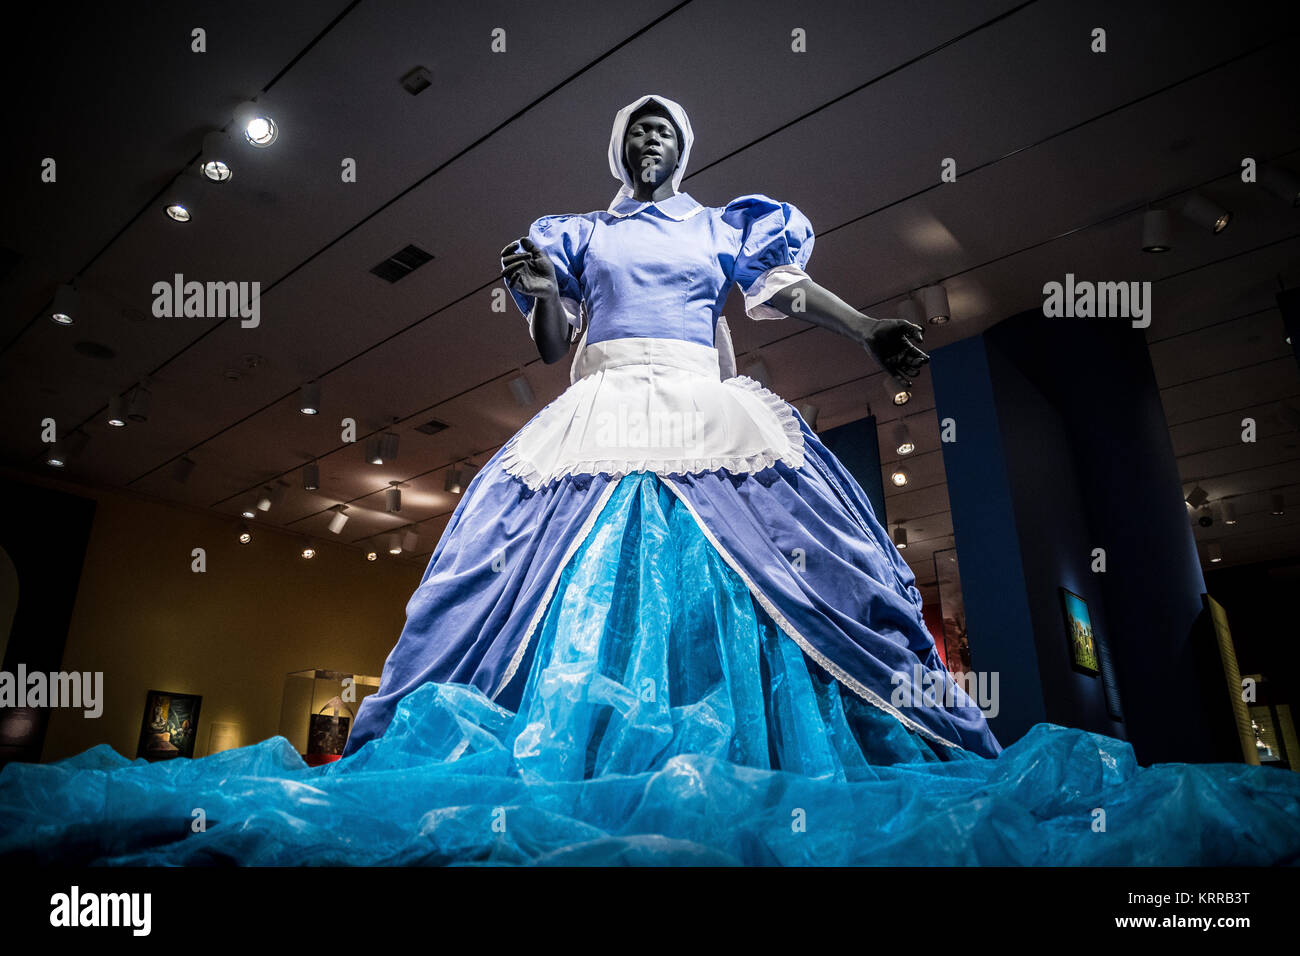 WASHINGTON, DC - A mixed media piece by South African artist Mary Sibande titled Sophie-Merica (2009). It combines the traditional blue uniform of domestic workers with a Cinderella-like gown that suggests indomitable imagination. It is on display at the Smithsonian National Museum of African Art in Washington DC. Located on the National Mall in Washington DC, the National Museum of African Art is the only national museum in the United States dedicated to the collection, exhibition, conservation, and study of the arts of Africa. Stock Photo